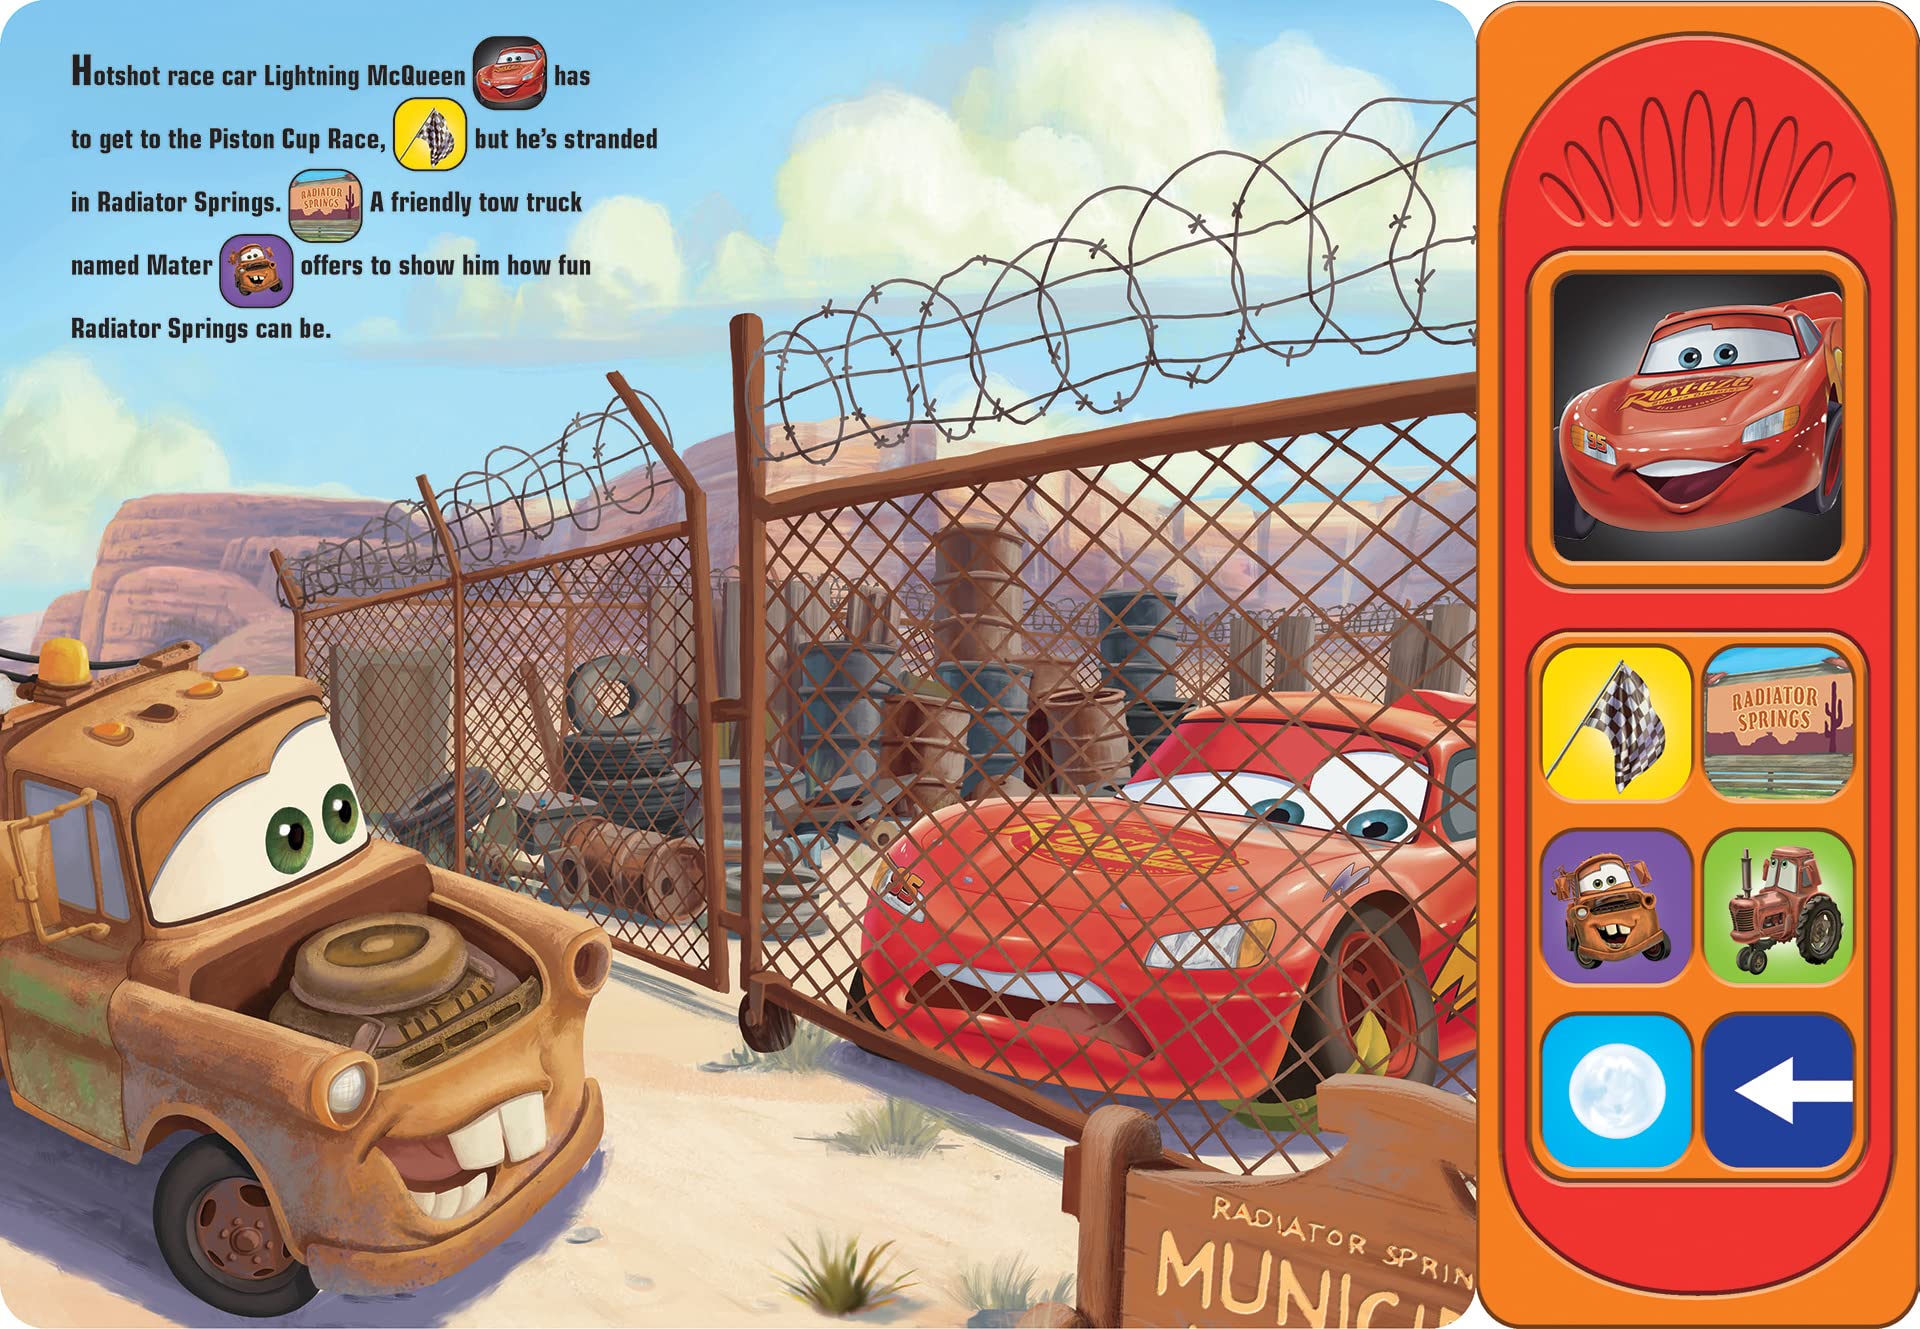 Disney Pixar Cars - Friends to the Finish Line 7-Button Sound Book - Featuring Lightning McQueen and Mater - PI Kids